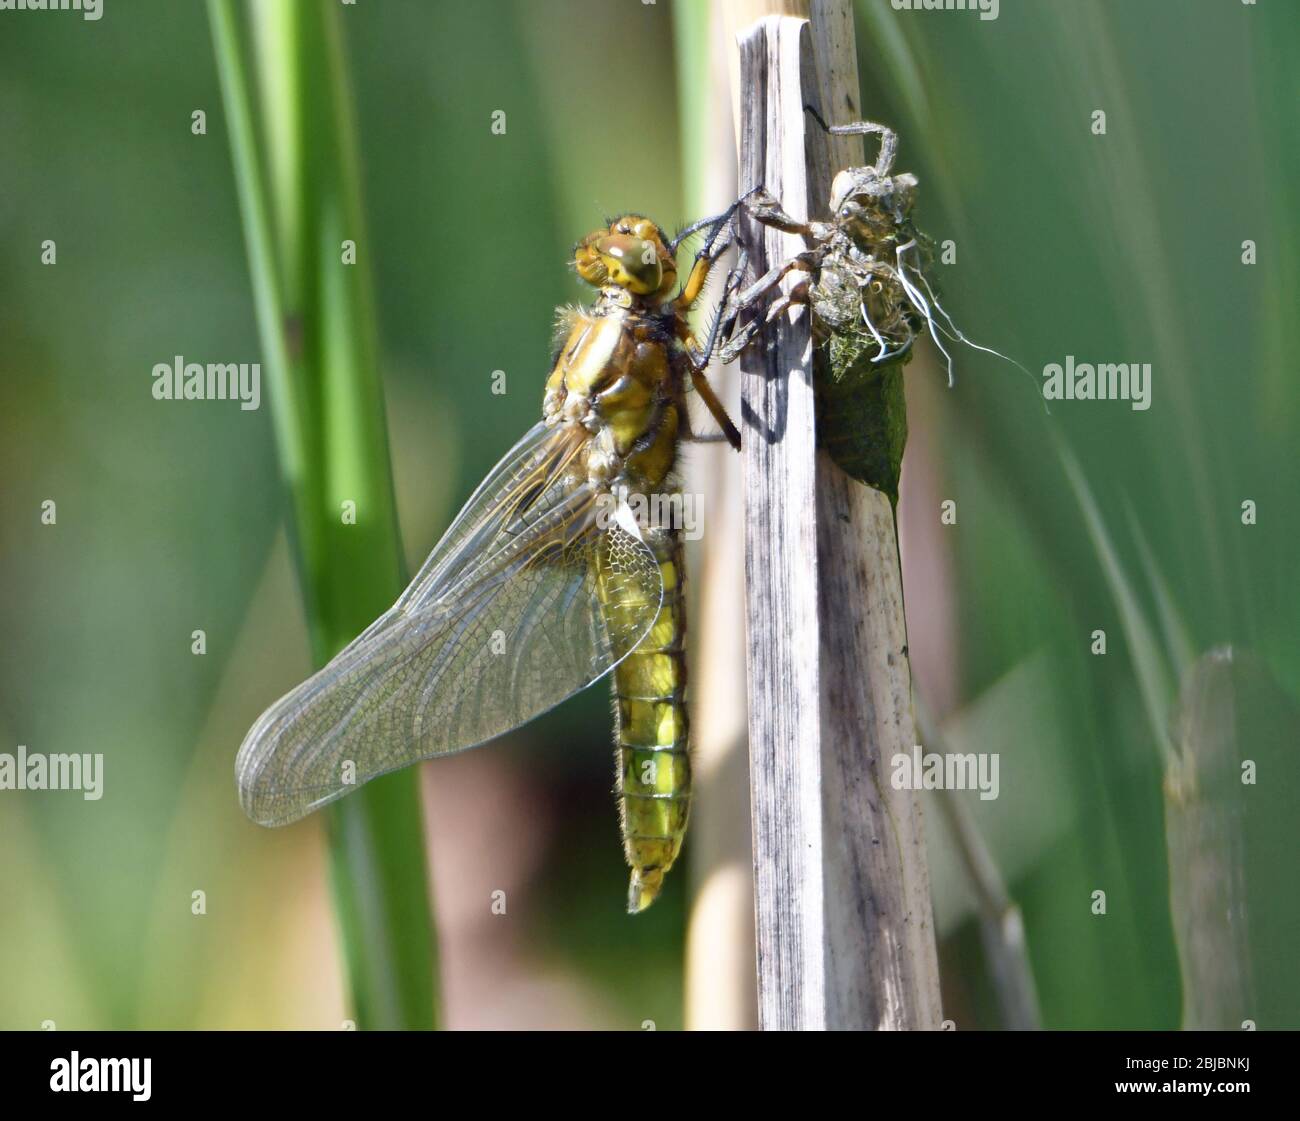 Newly emerged dragonfly after shedding its nymph skin and transforming into its dragonfly form. Nymph skin also shown. Pond reeds. Lifecycle. Stock Photo